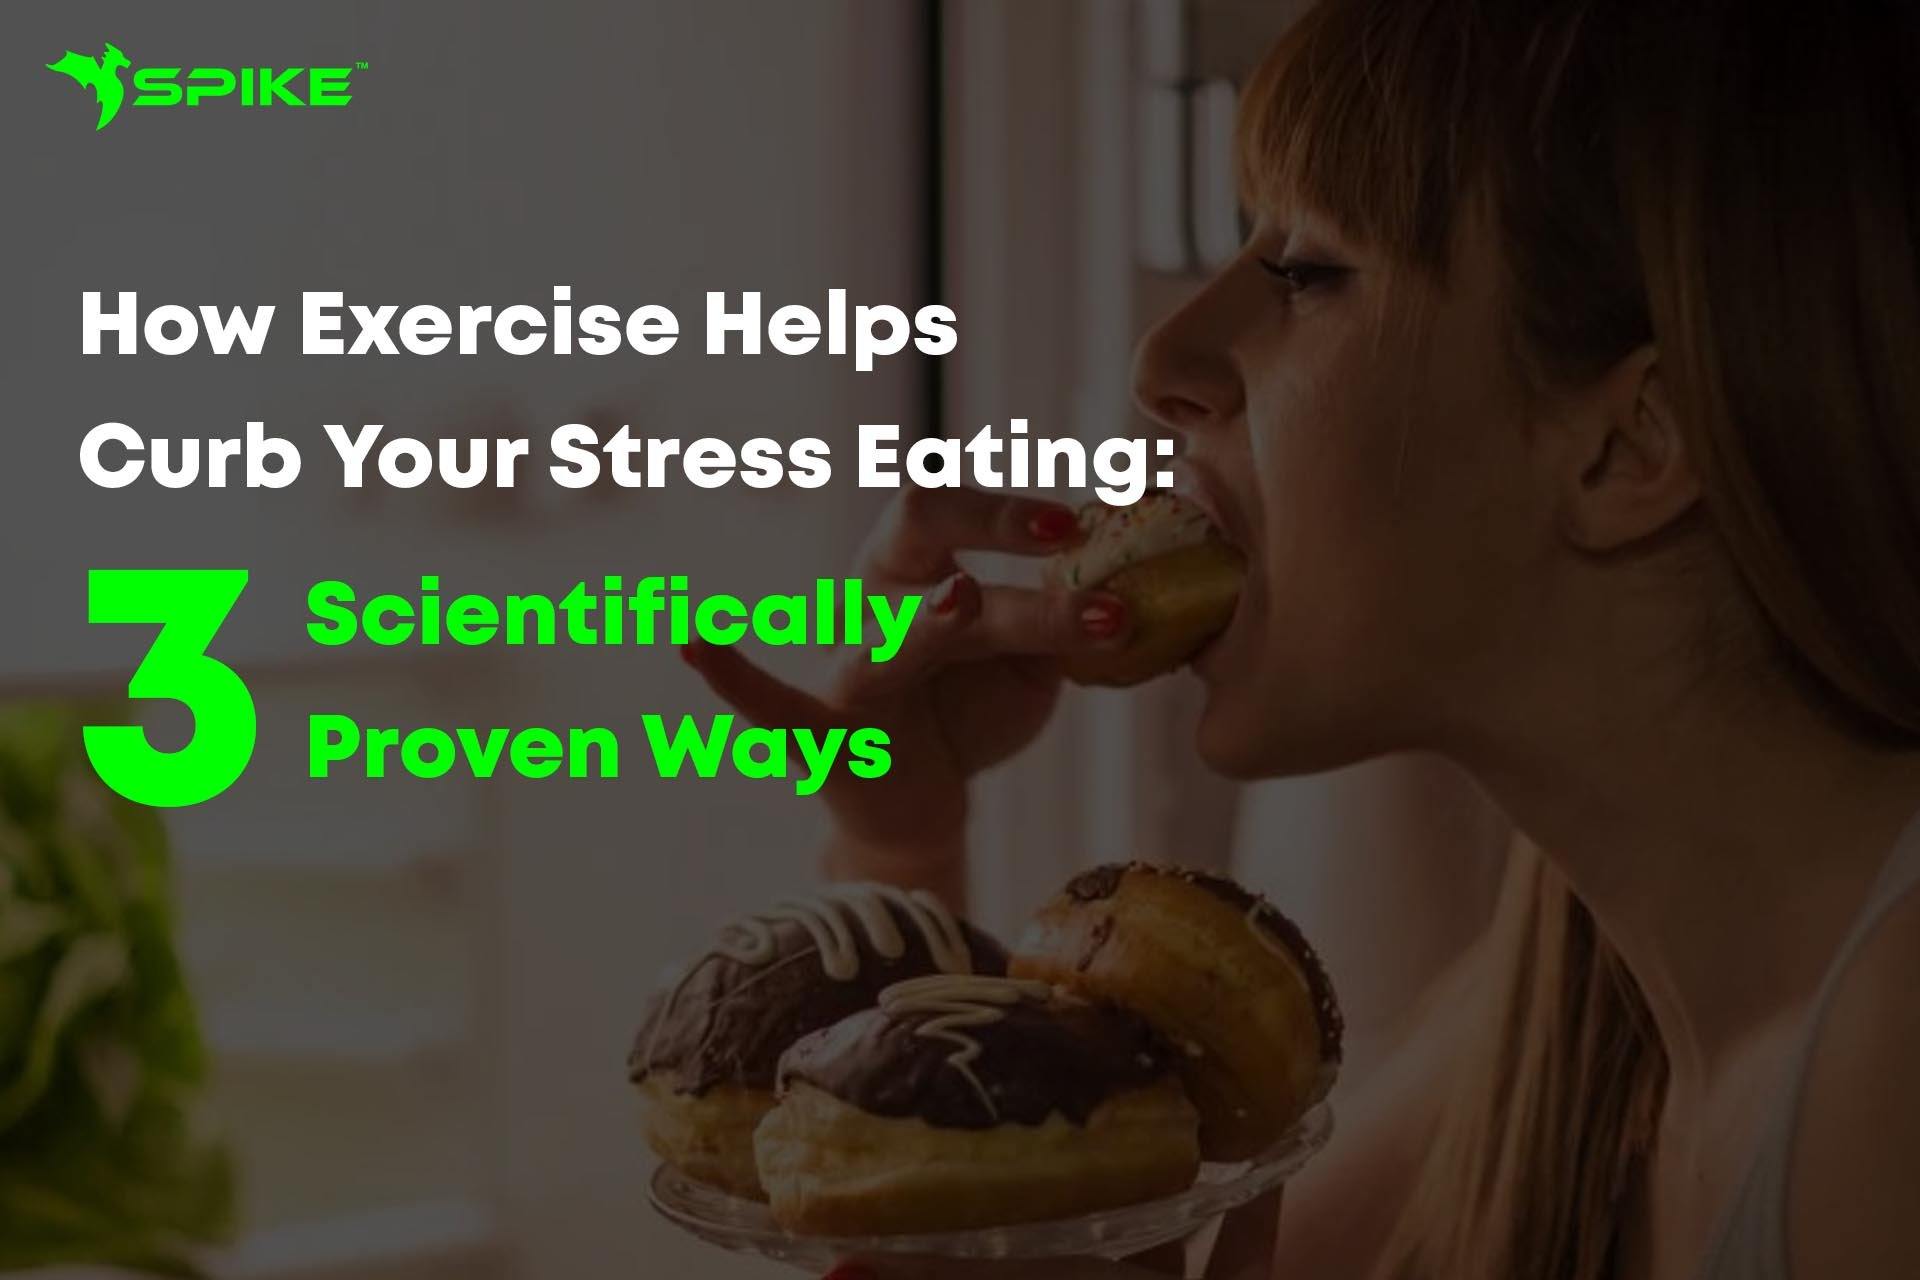 How Exercise Helps Curb Your Stress Eating: 3 Scientifically Proven Ways - Spike